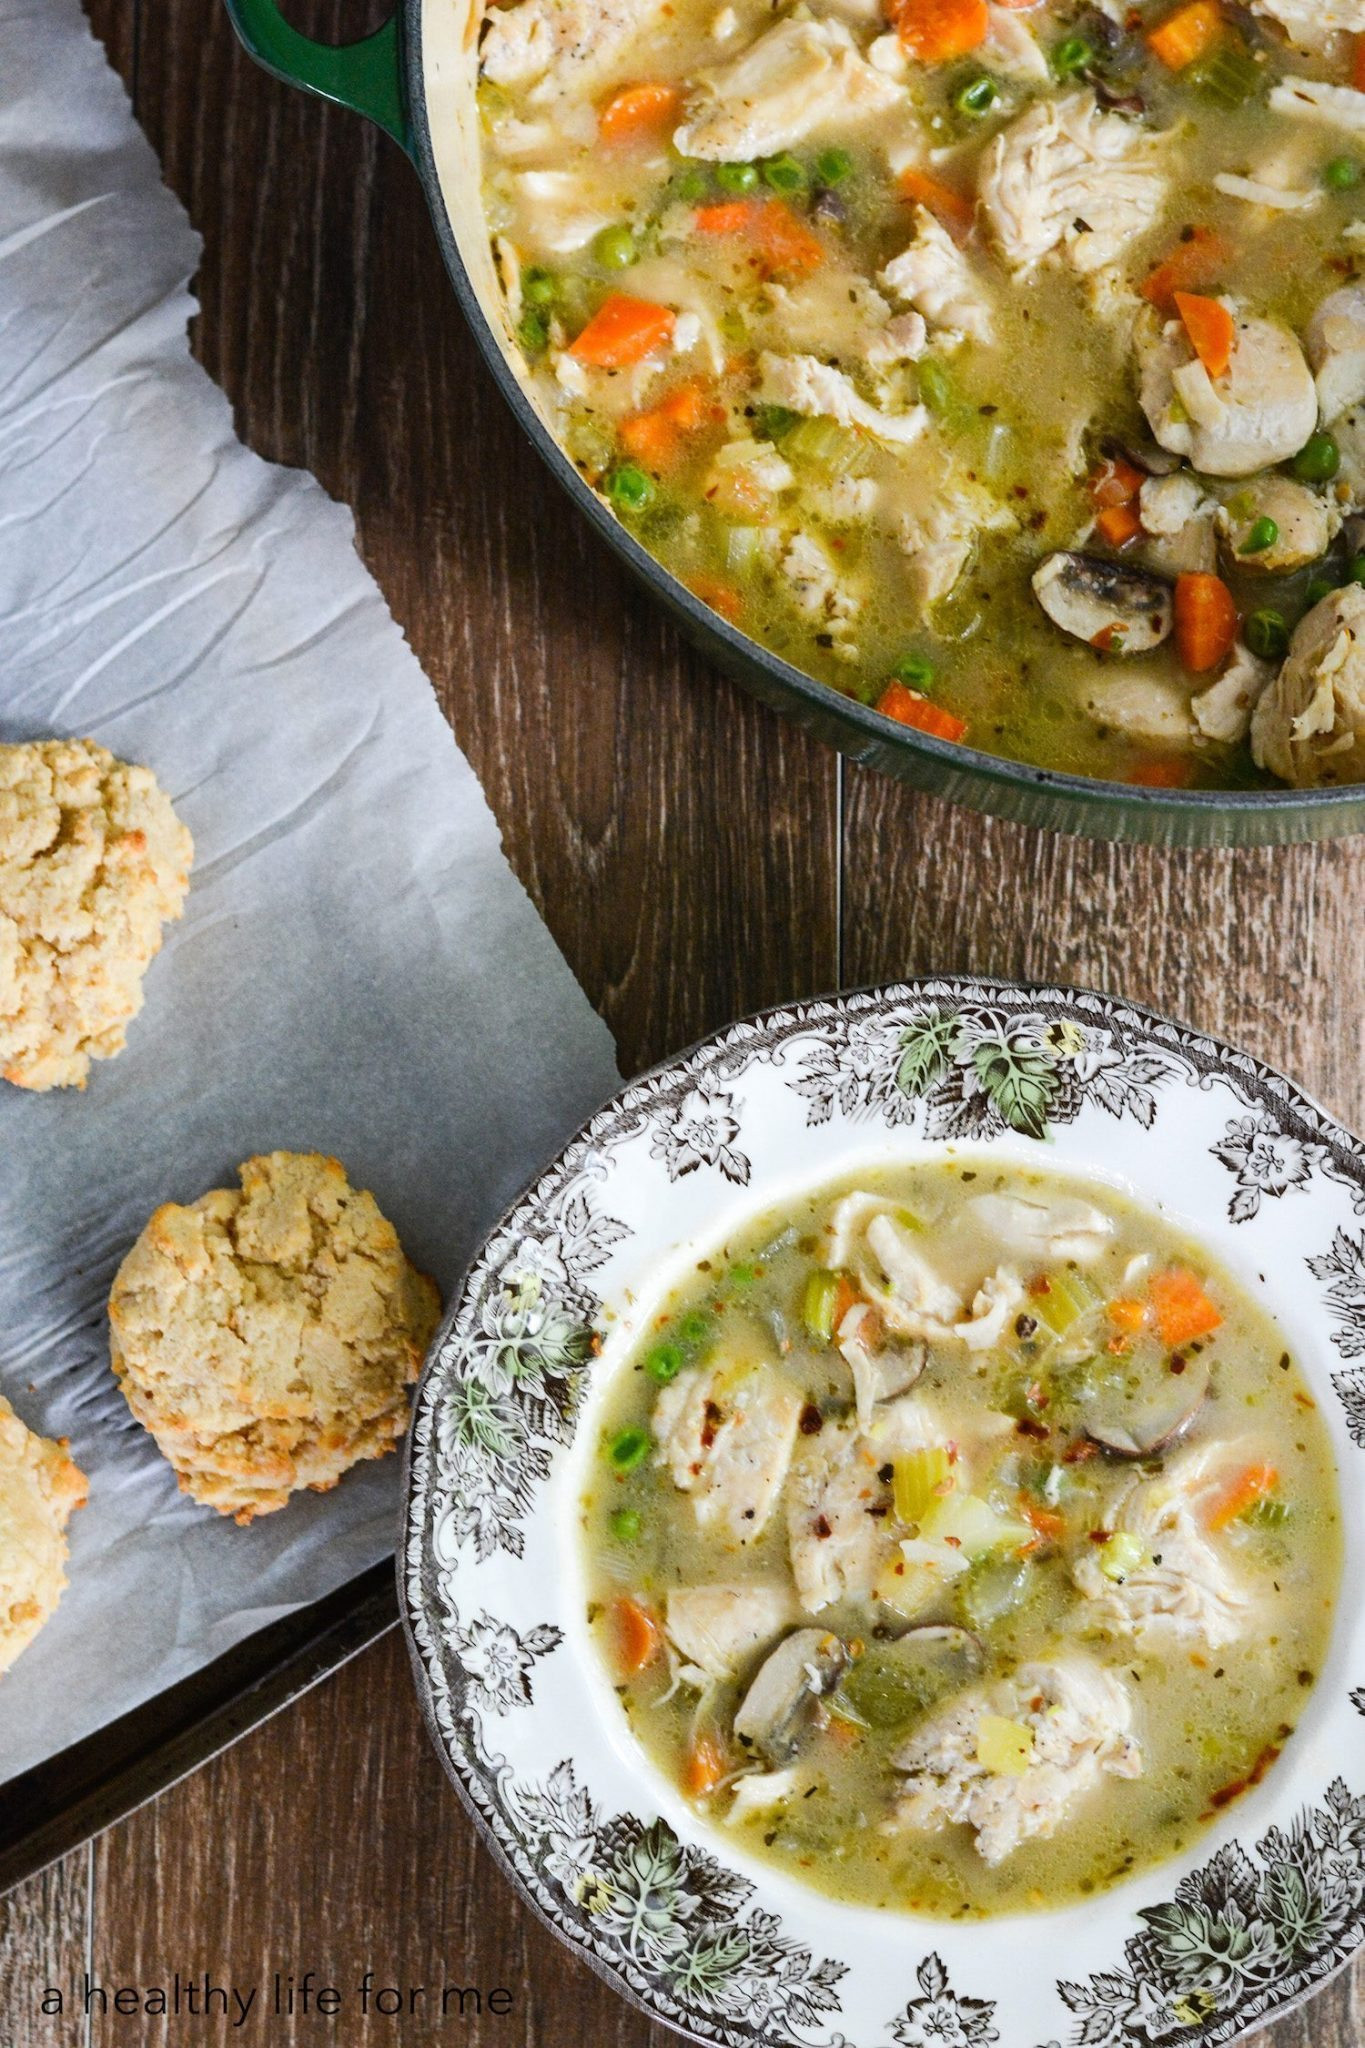 Paleo Chicken and Dumplings Elegant Paleo Chicken and Dumplings A Healthy Life for Me